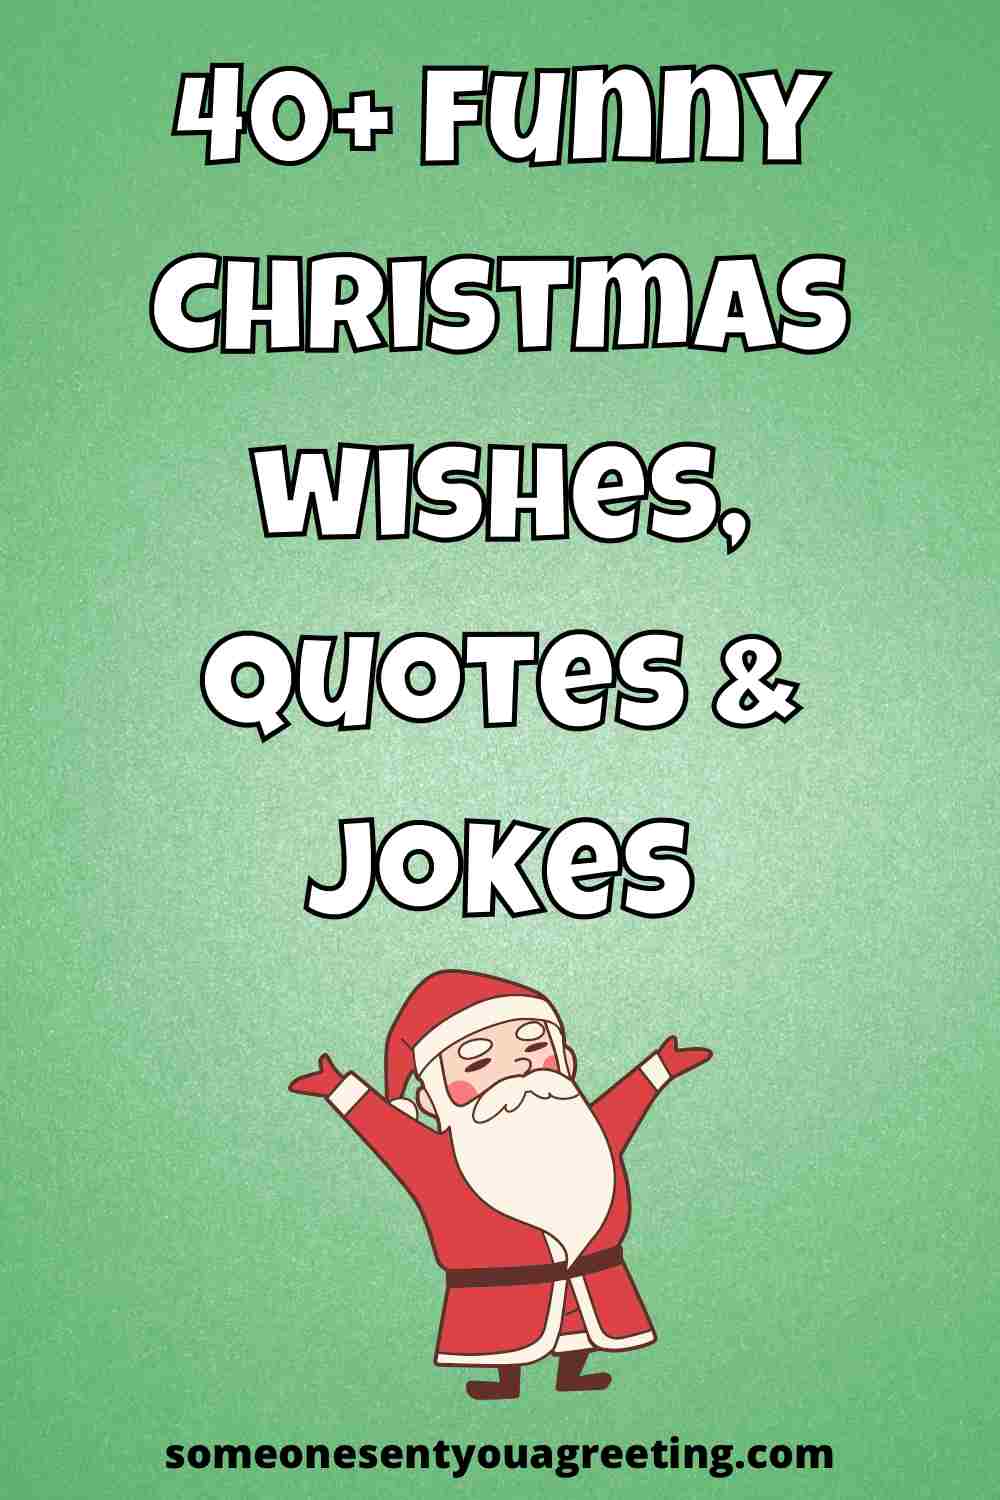 40+ Funny Christmas Wishes, Quotes and Jokes